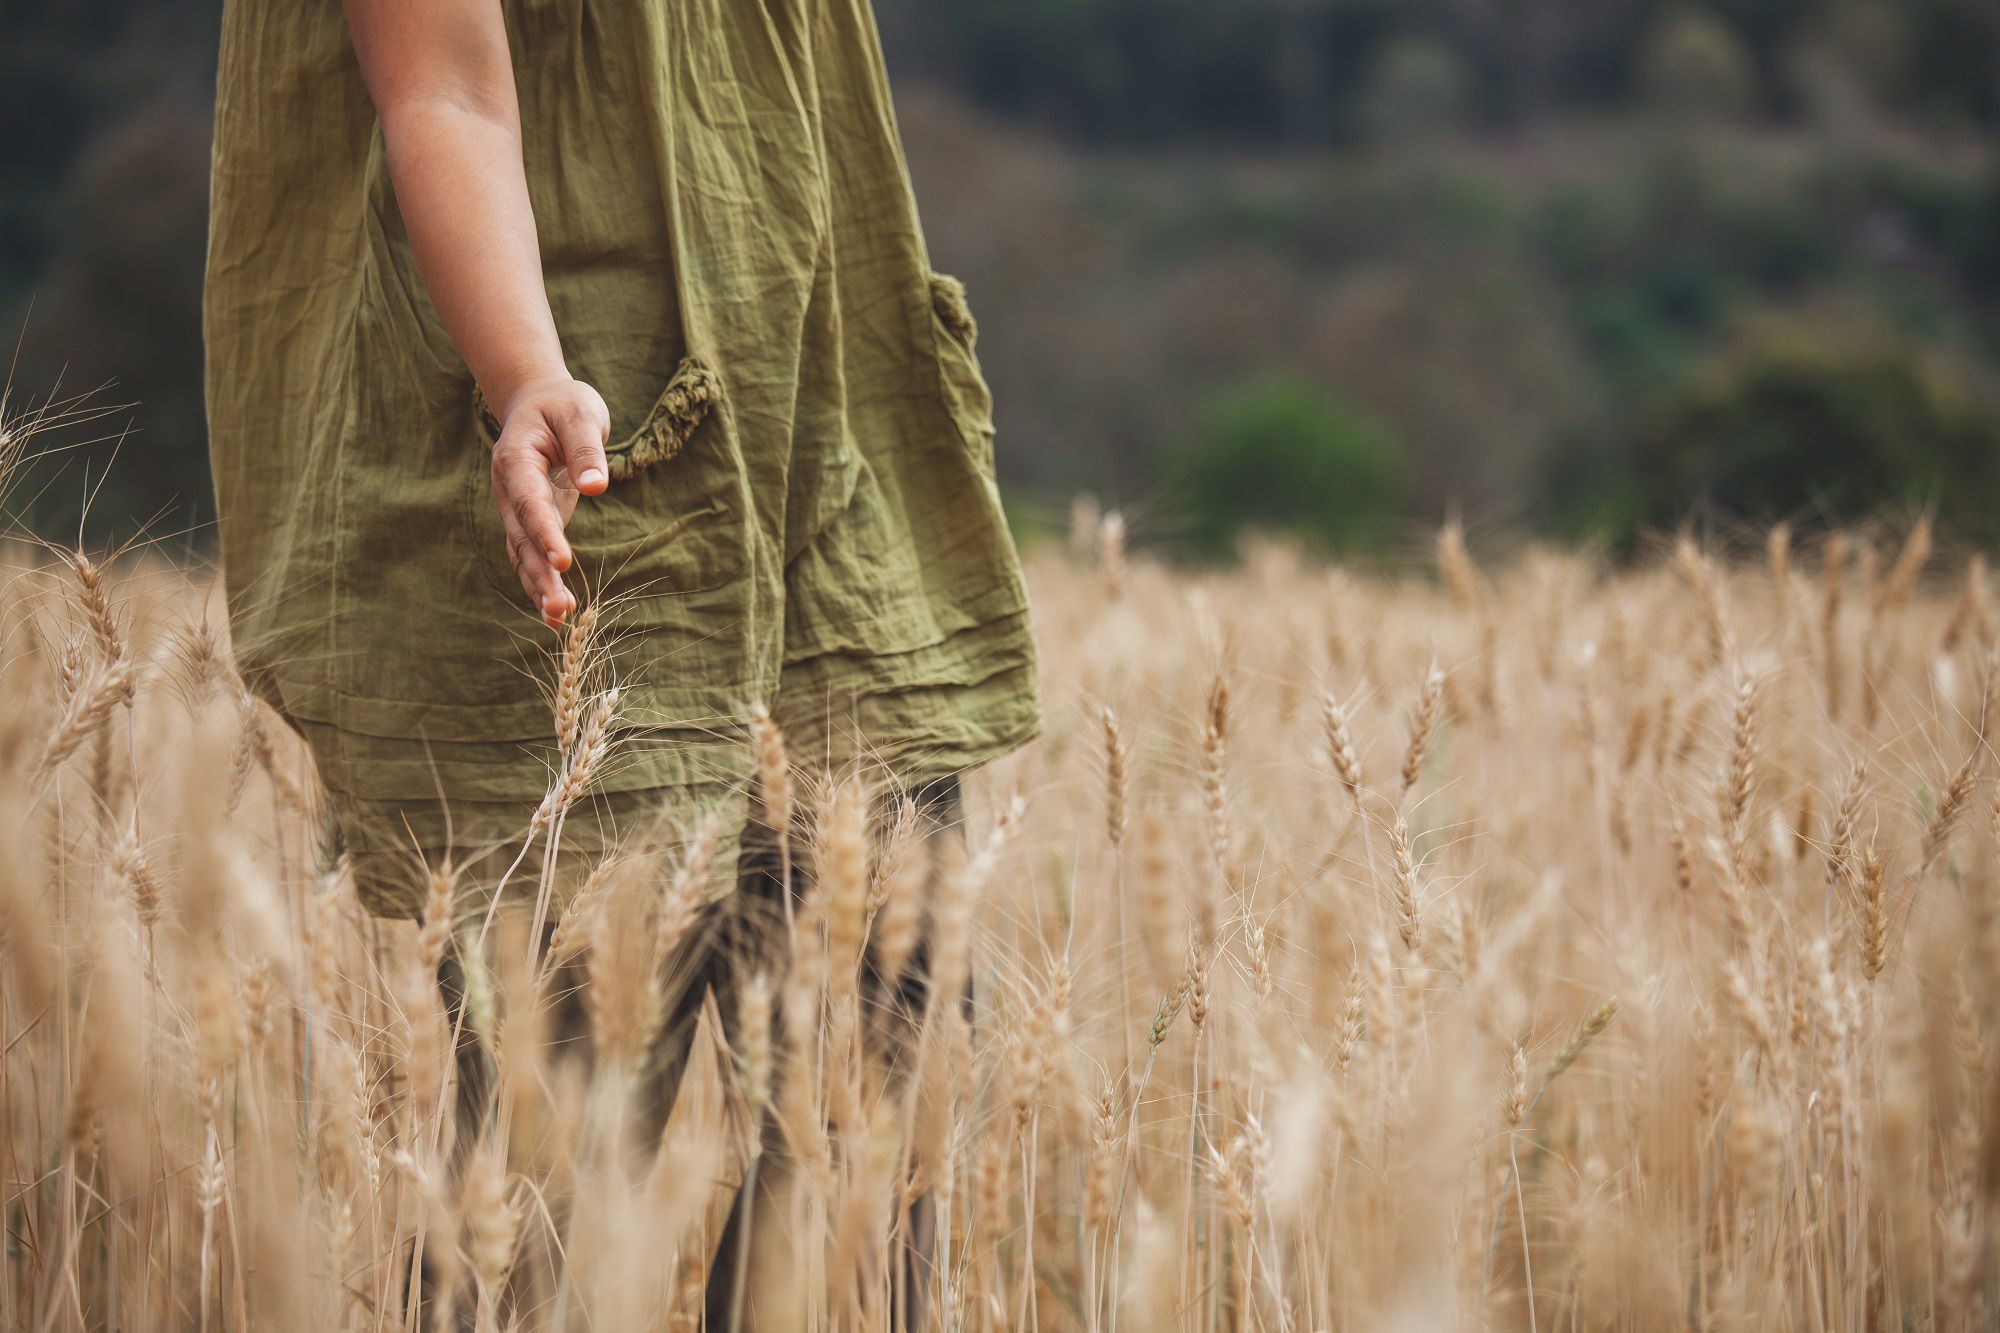 Woman's hand touching the ears of wheat with tenderness in the barley field